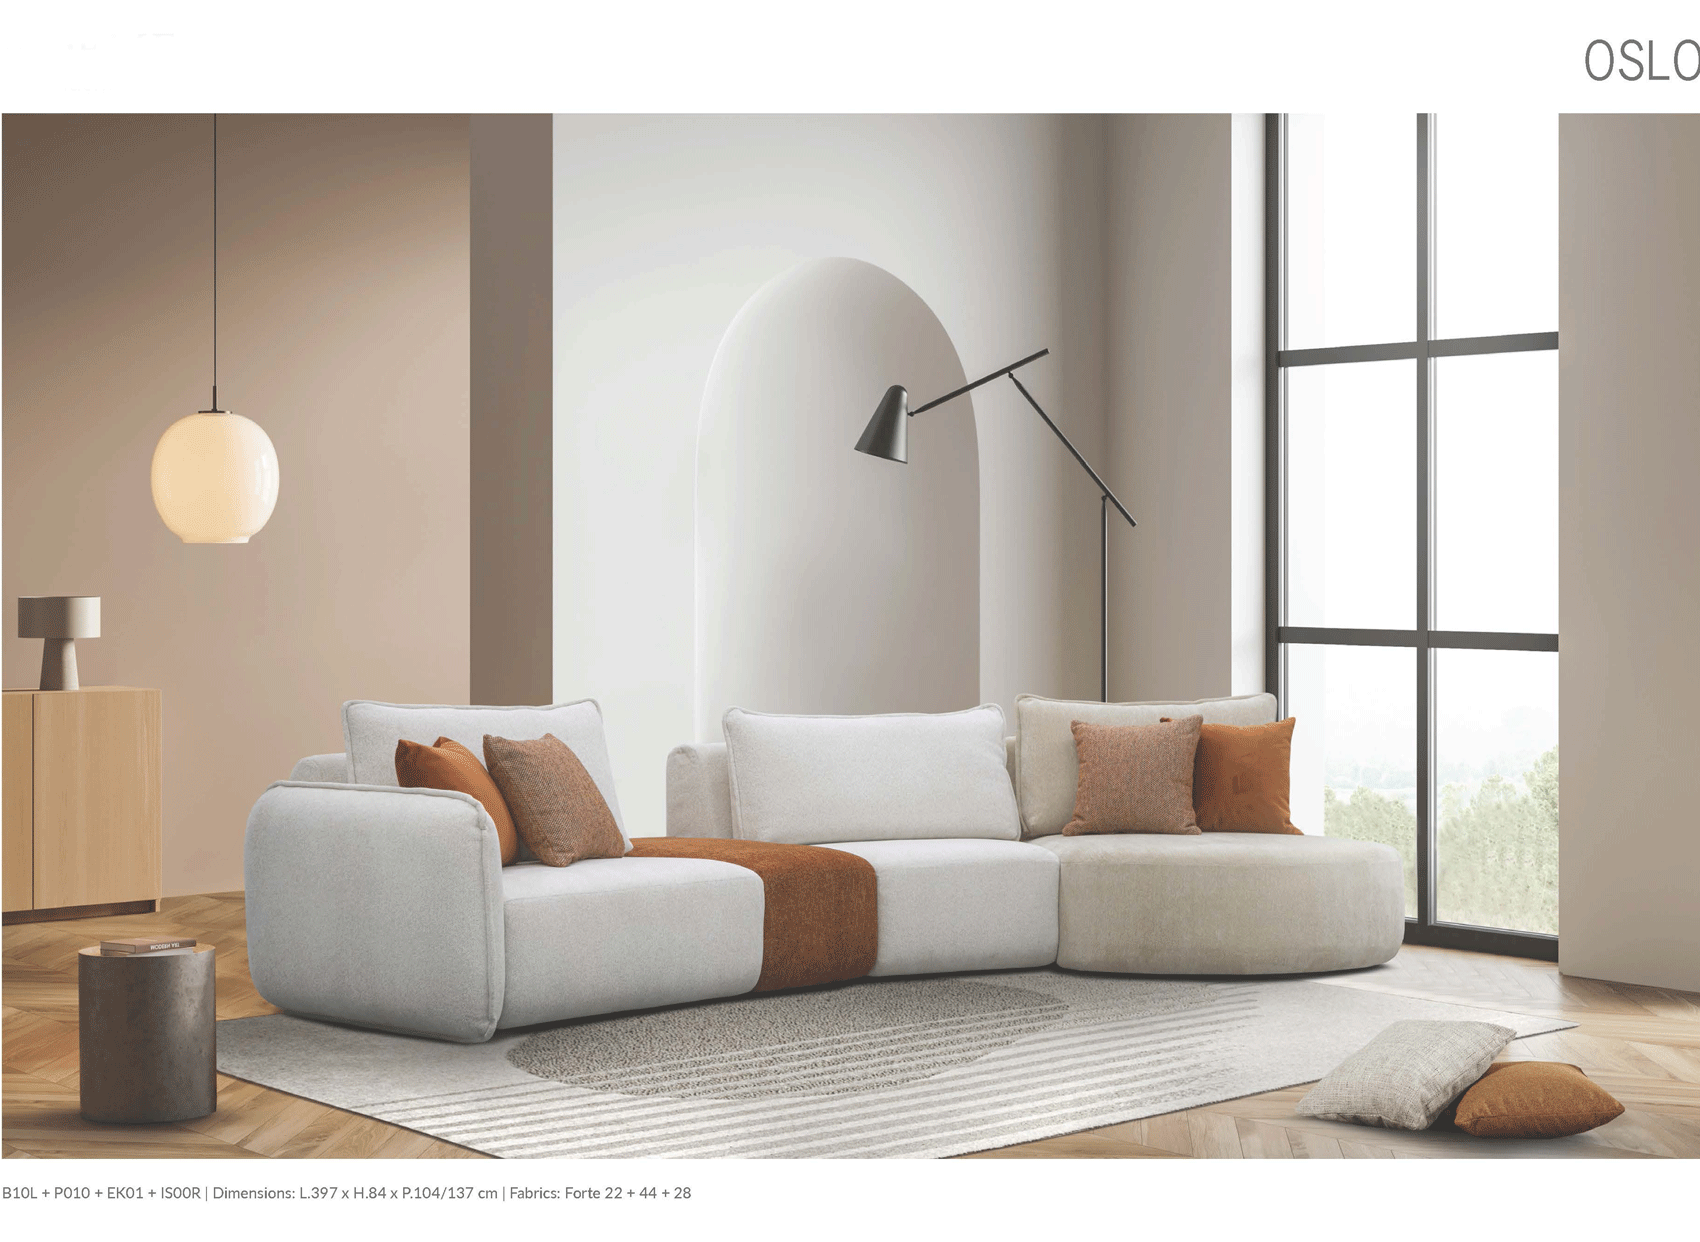 Living Room Furniture Sleepers Sofas Loveseats and Chairs Oslo Sectional